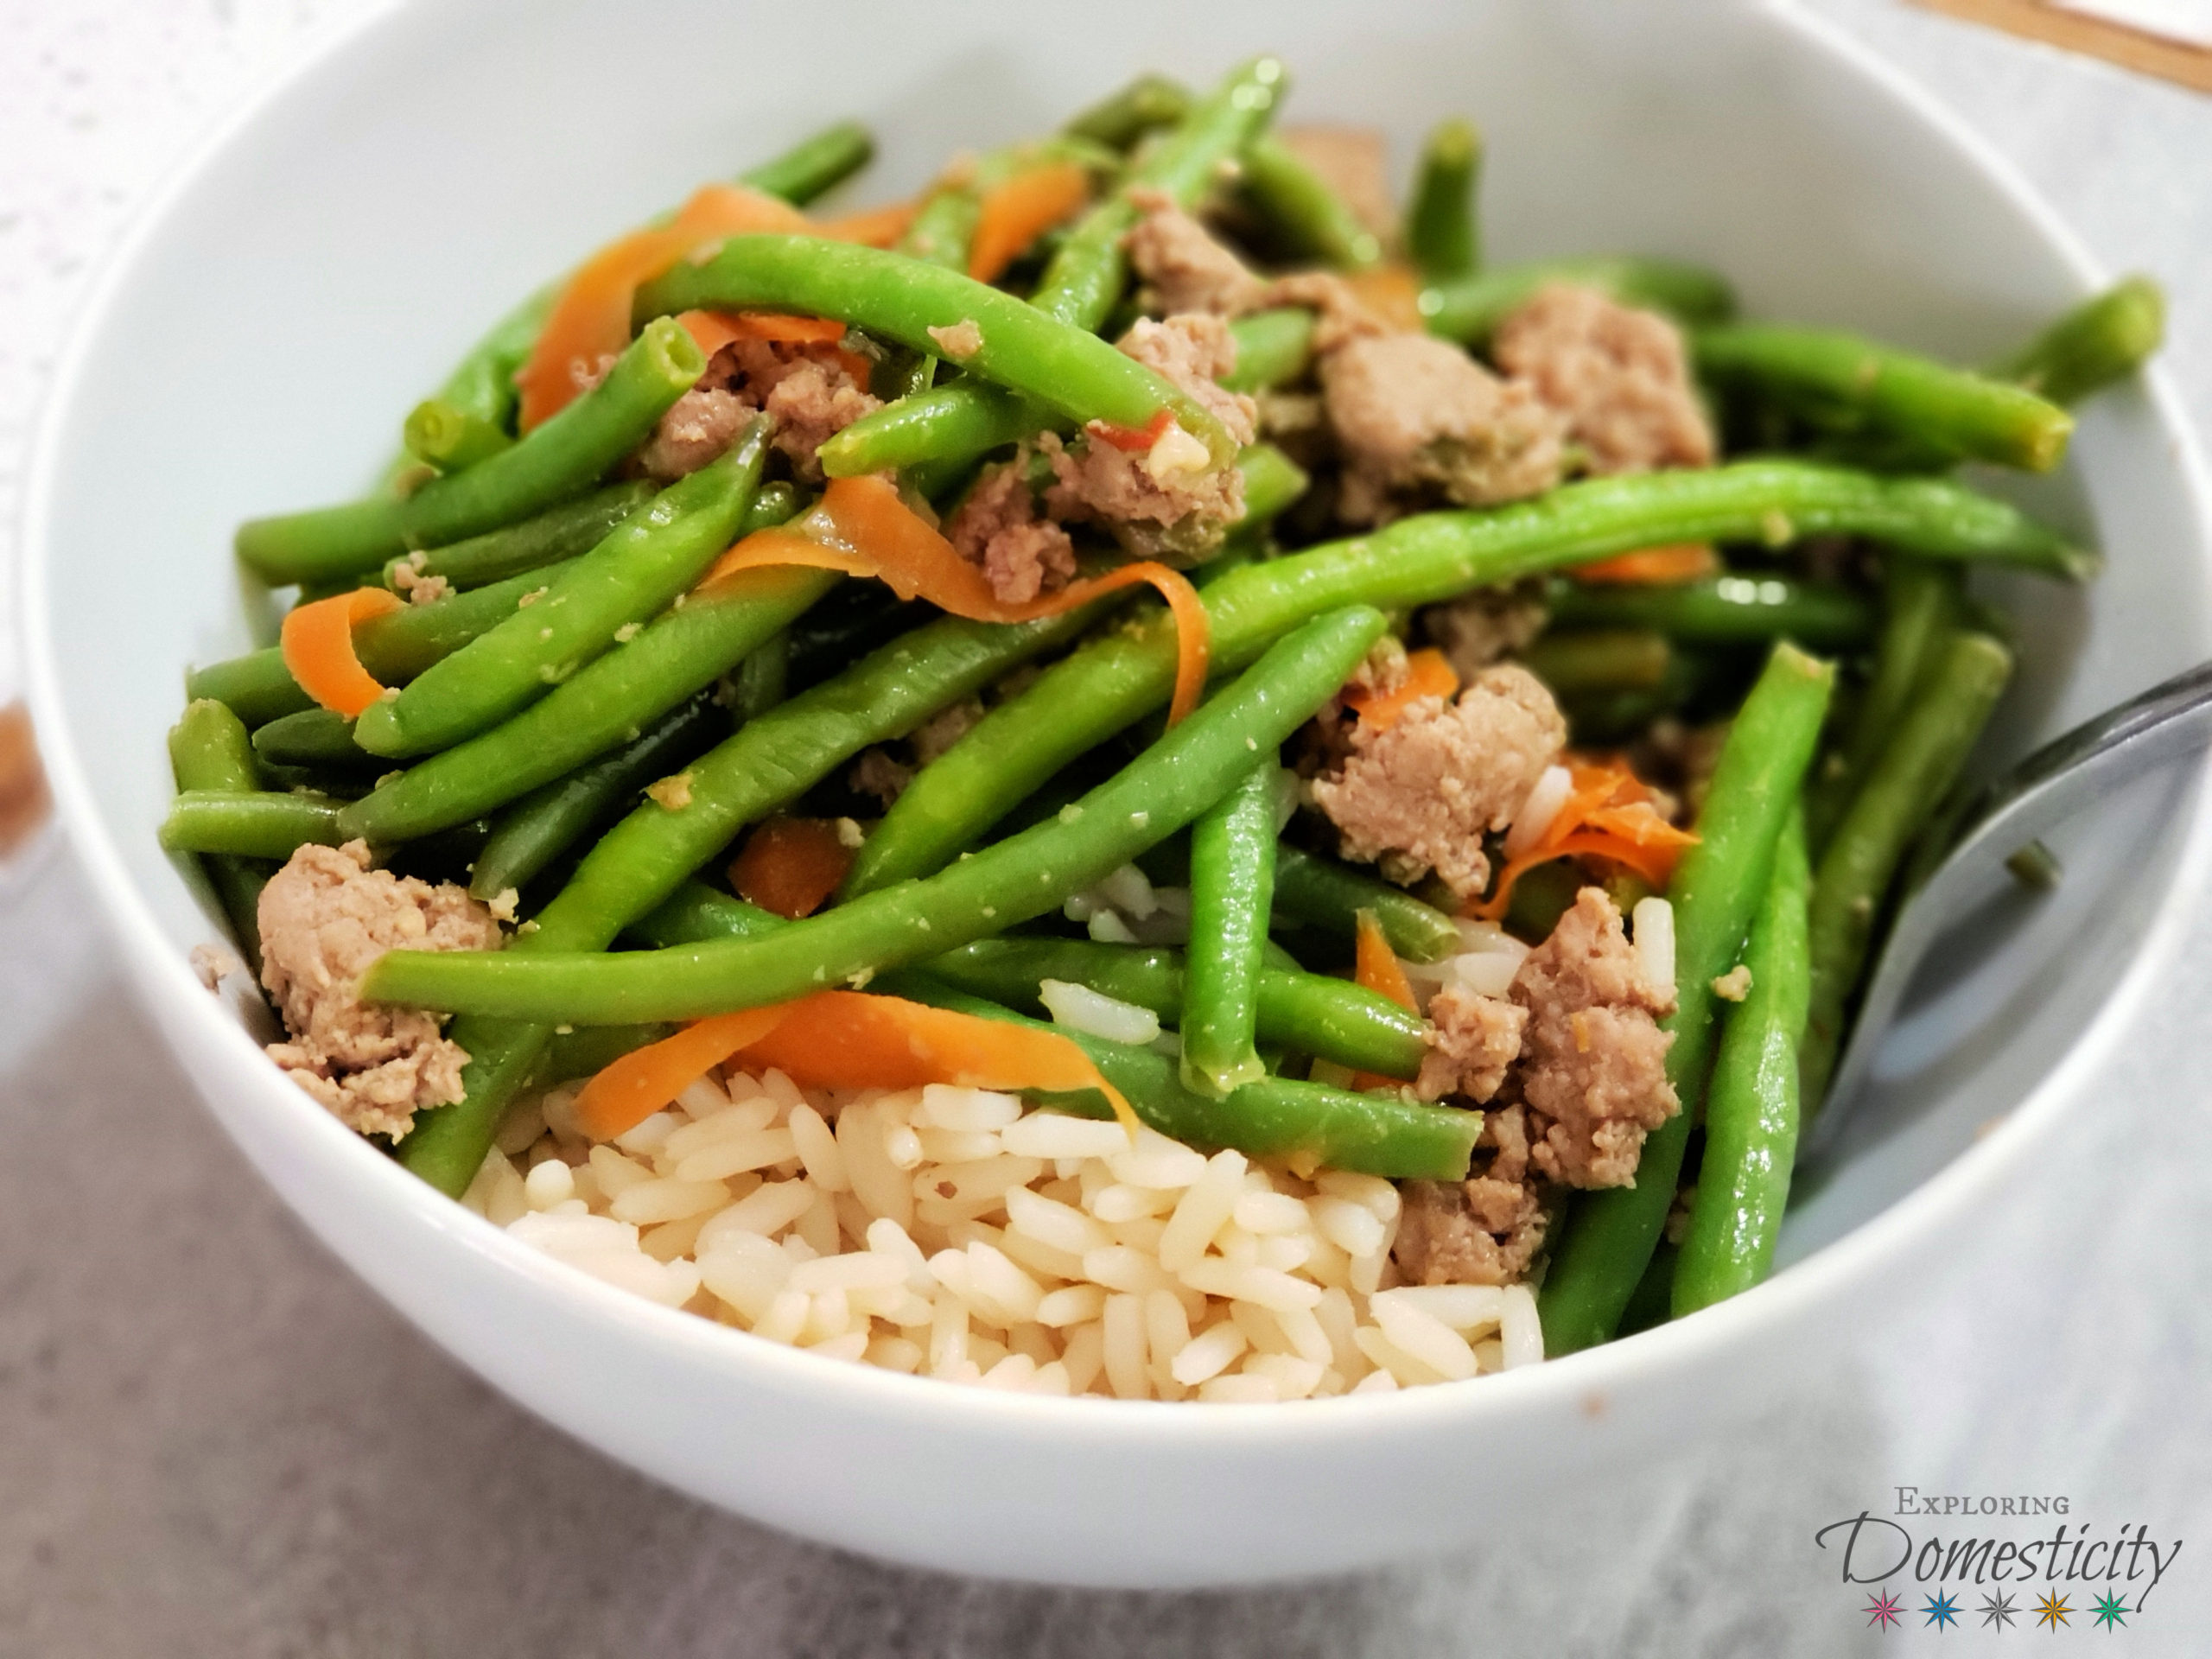 Ground Turkey and Green Beans Stir Fry - perfect recipe for your Chinese food cravings